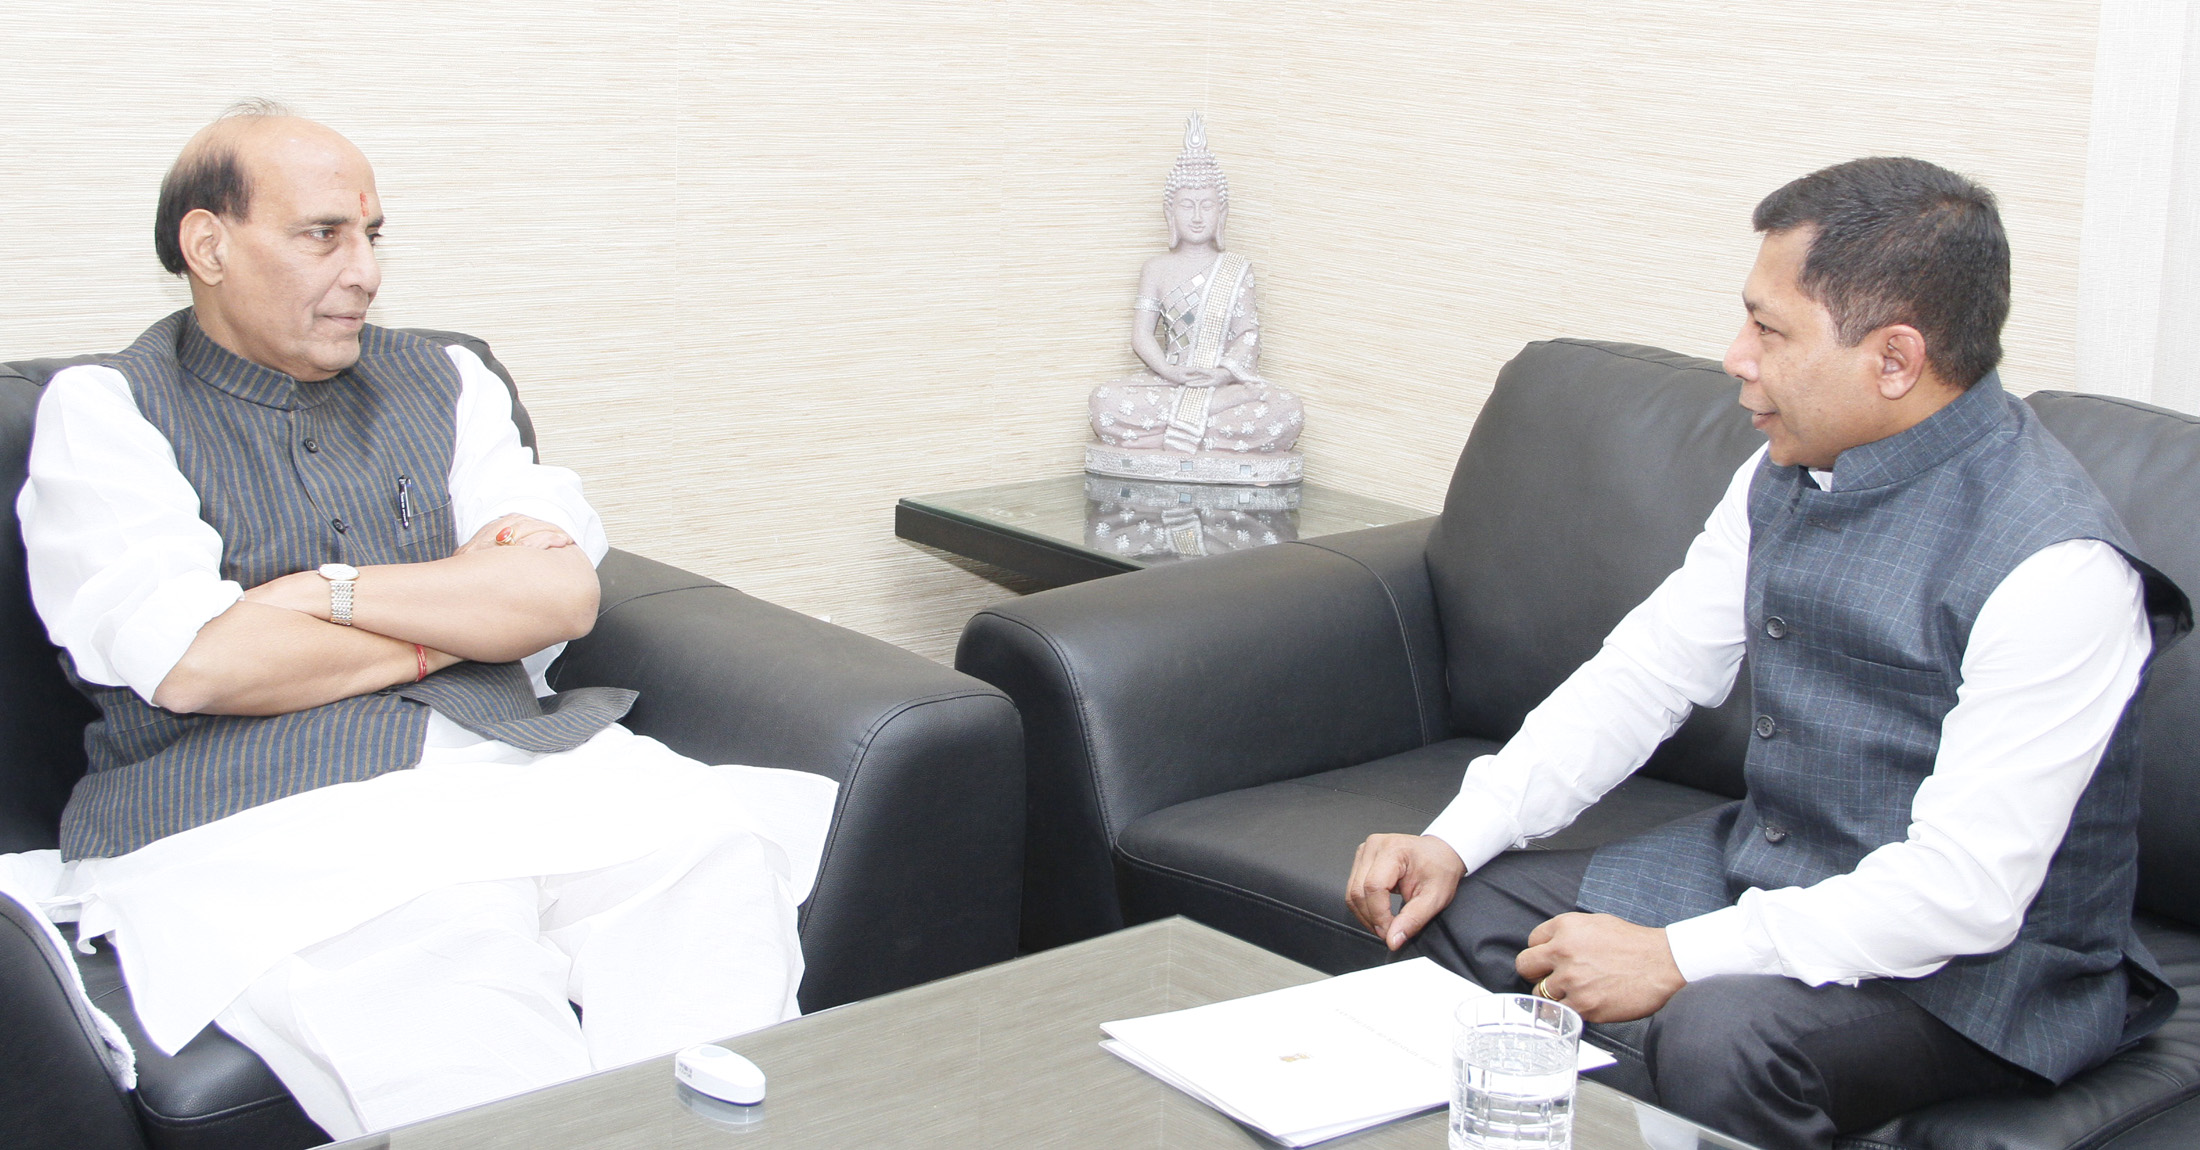 The Chief Minister of Meghalaya, Dr. Mukul Sangma calling on the Union Home Minister, Shri Rajnath Singh, in New Delhi on November 01, 2015.